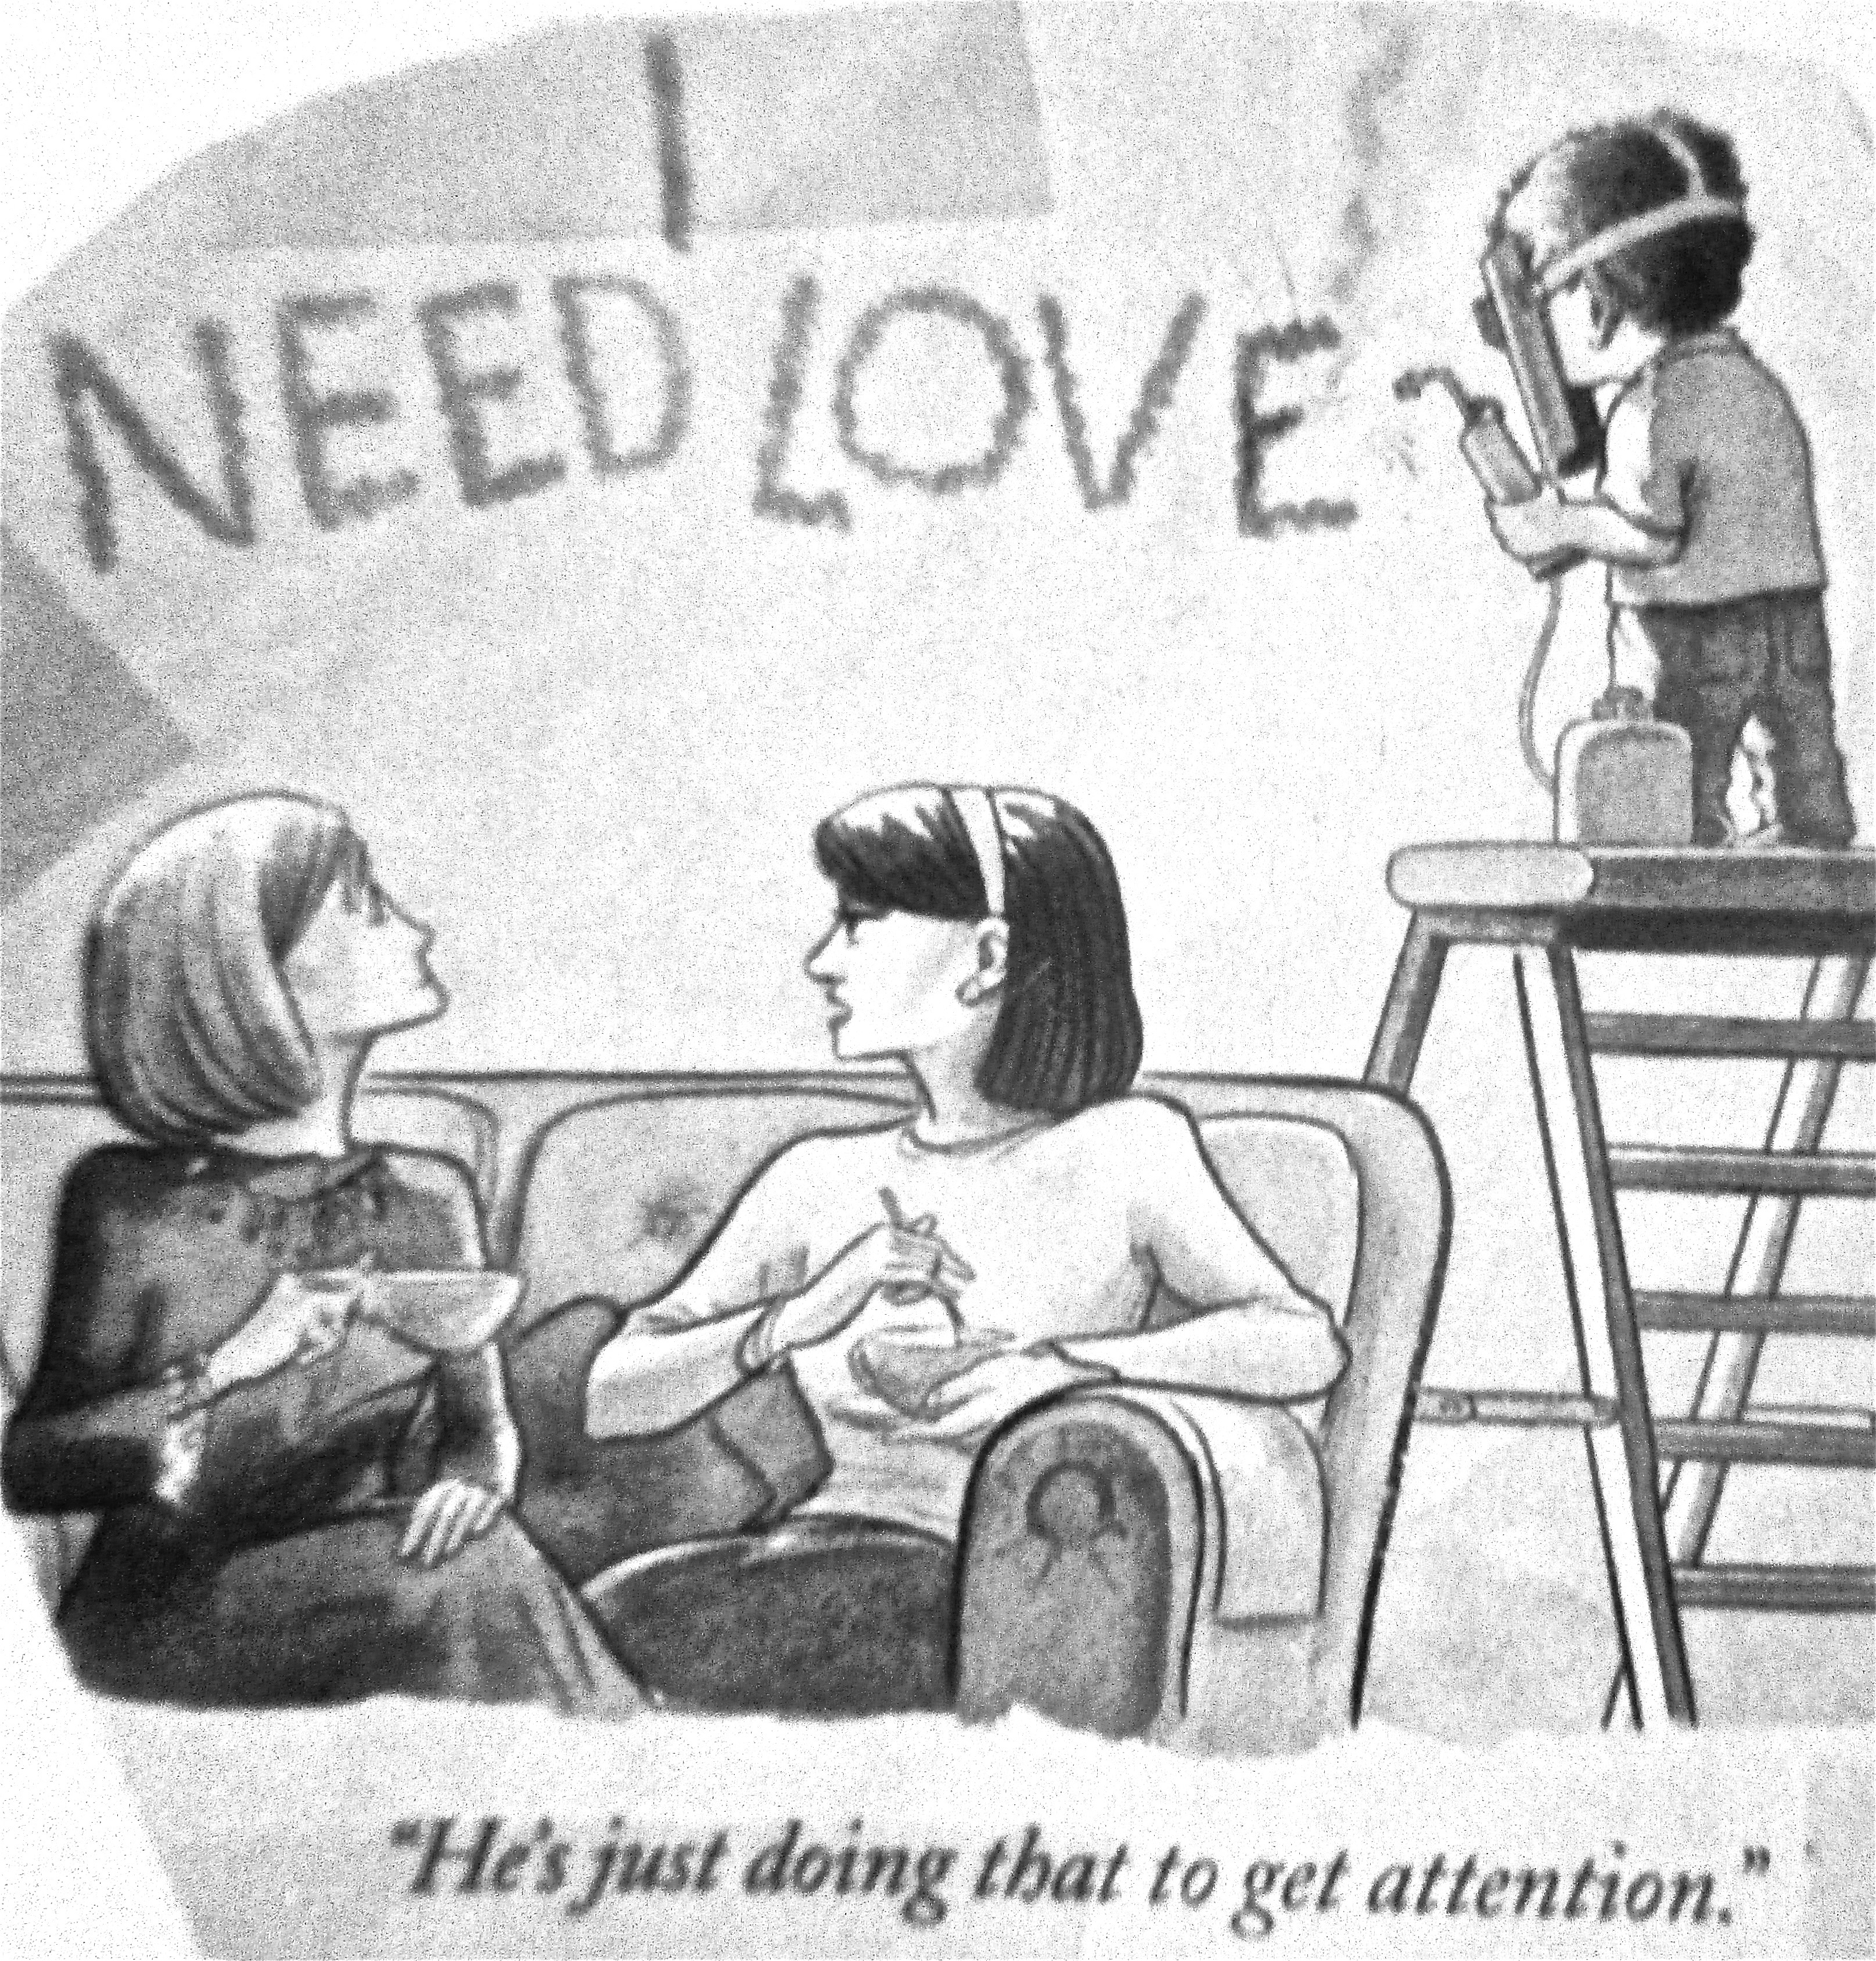 Cartoon-I-Need-Love-Hes-Just-Doing-That-To-Get-Attention.jpg